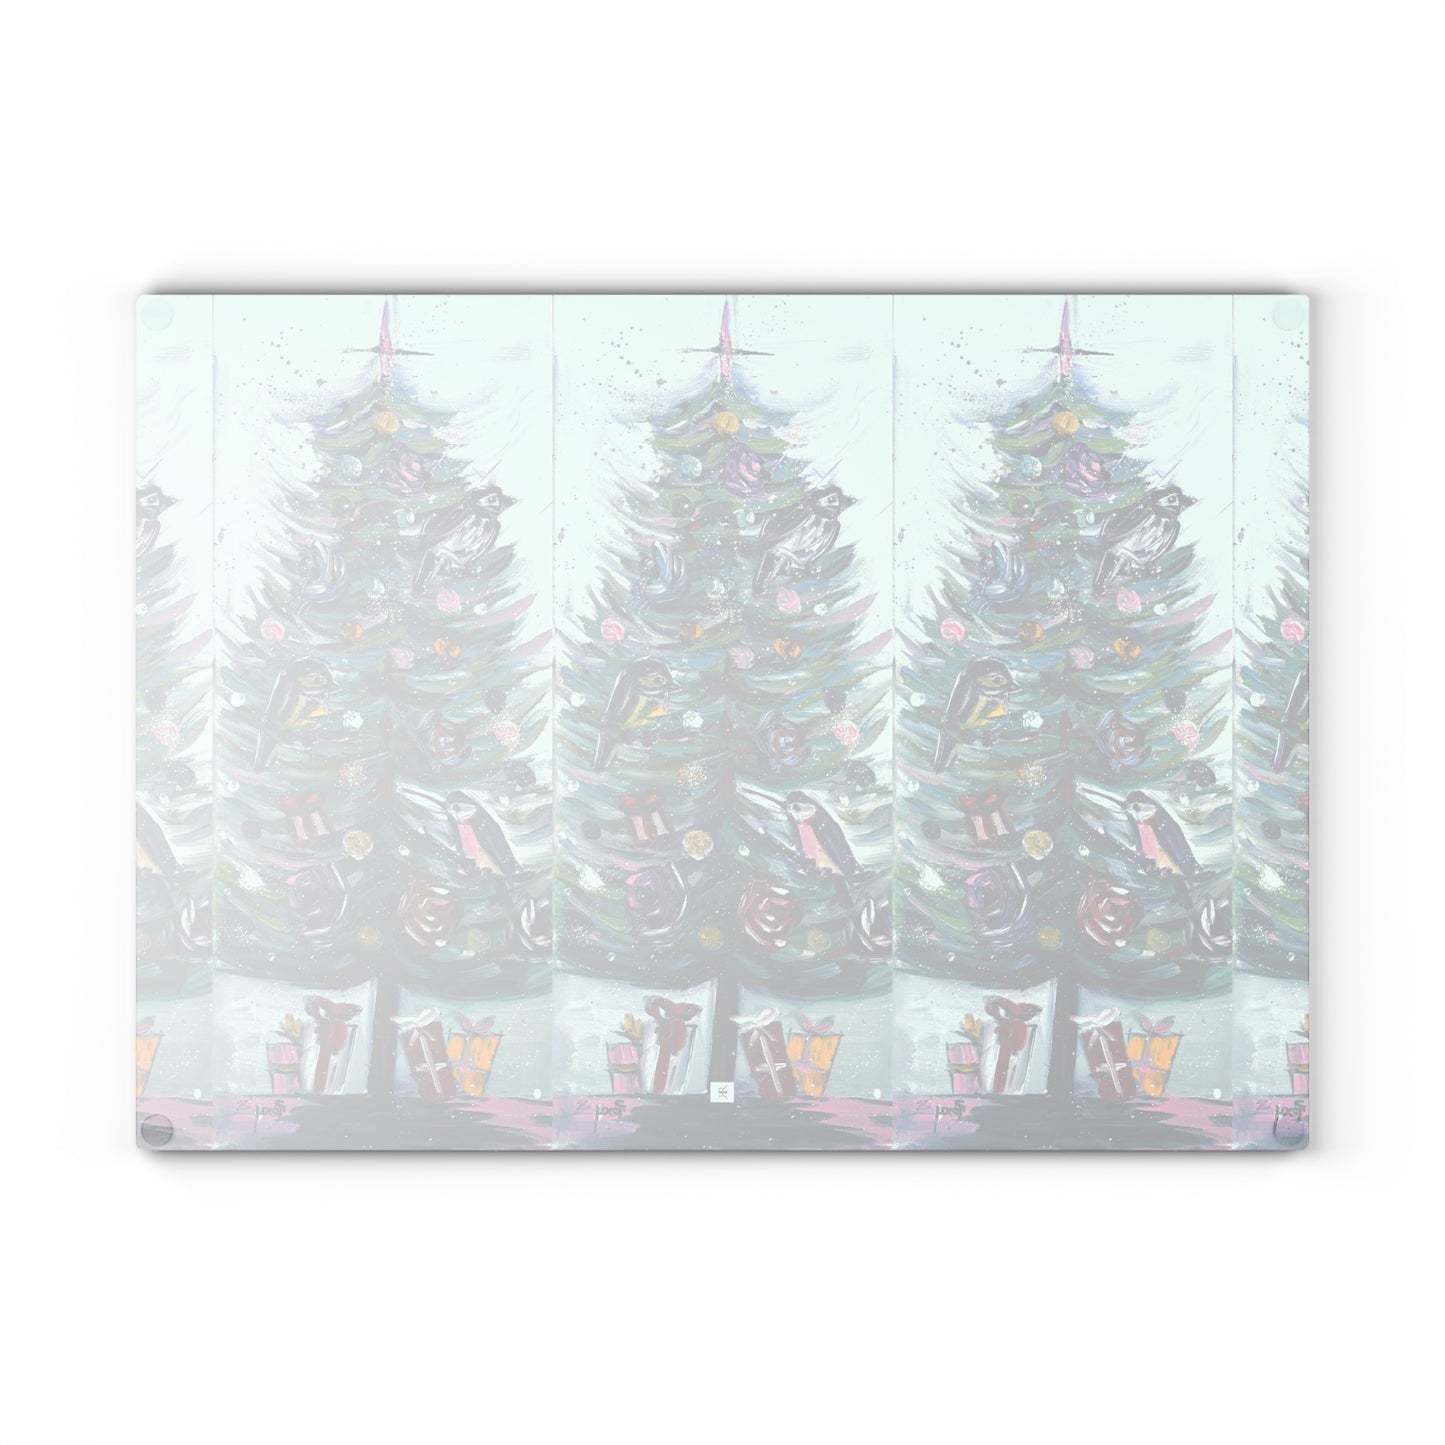 Festive Feathers-Birds in a Christmas Tree Glass Cutting Board